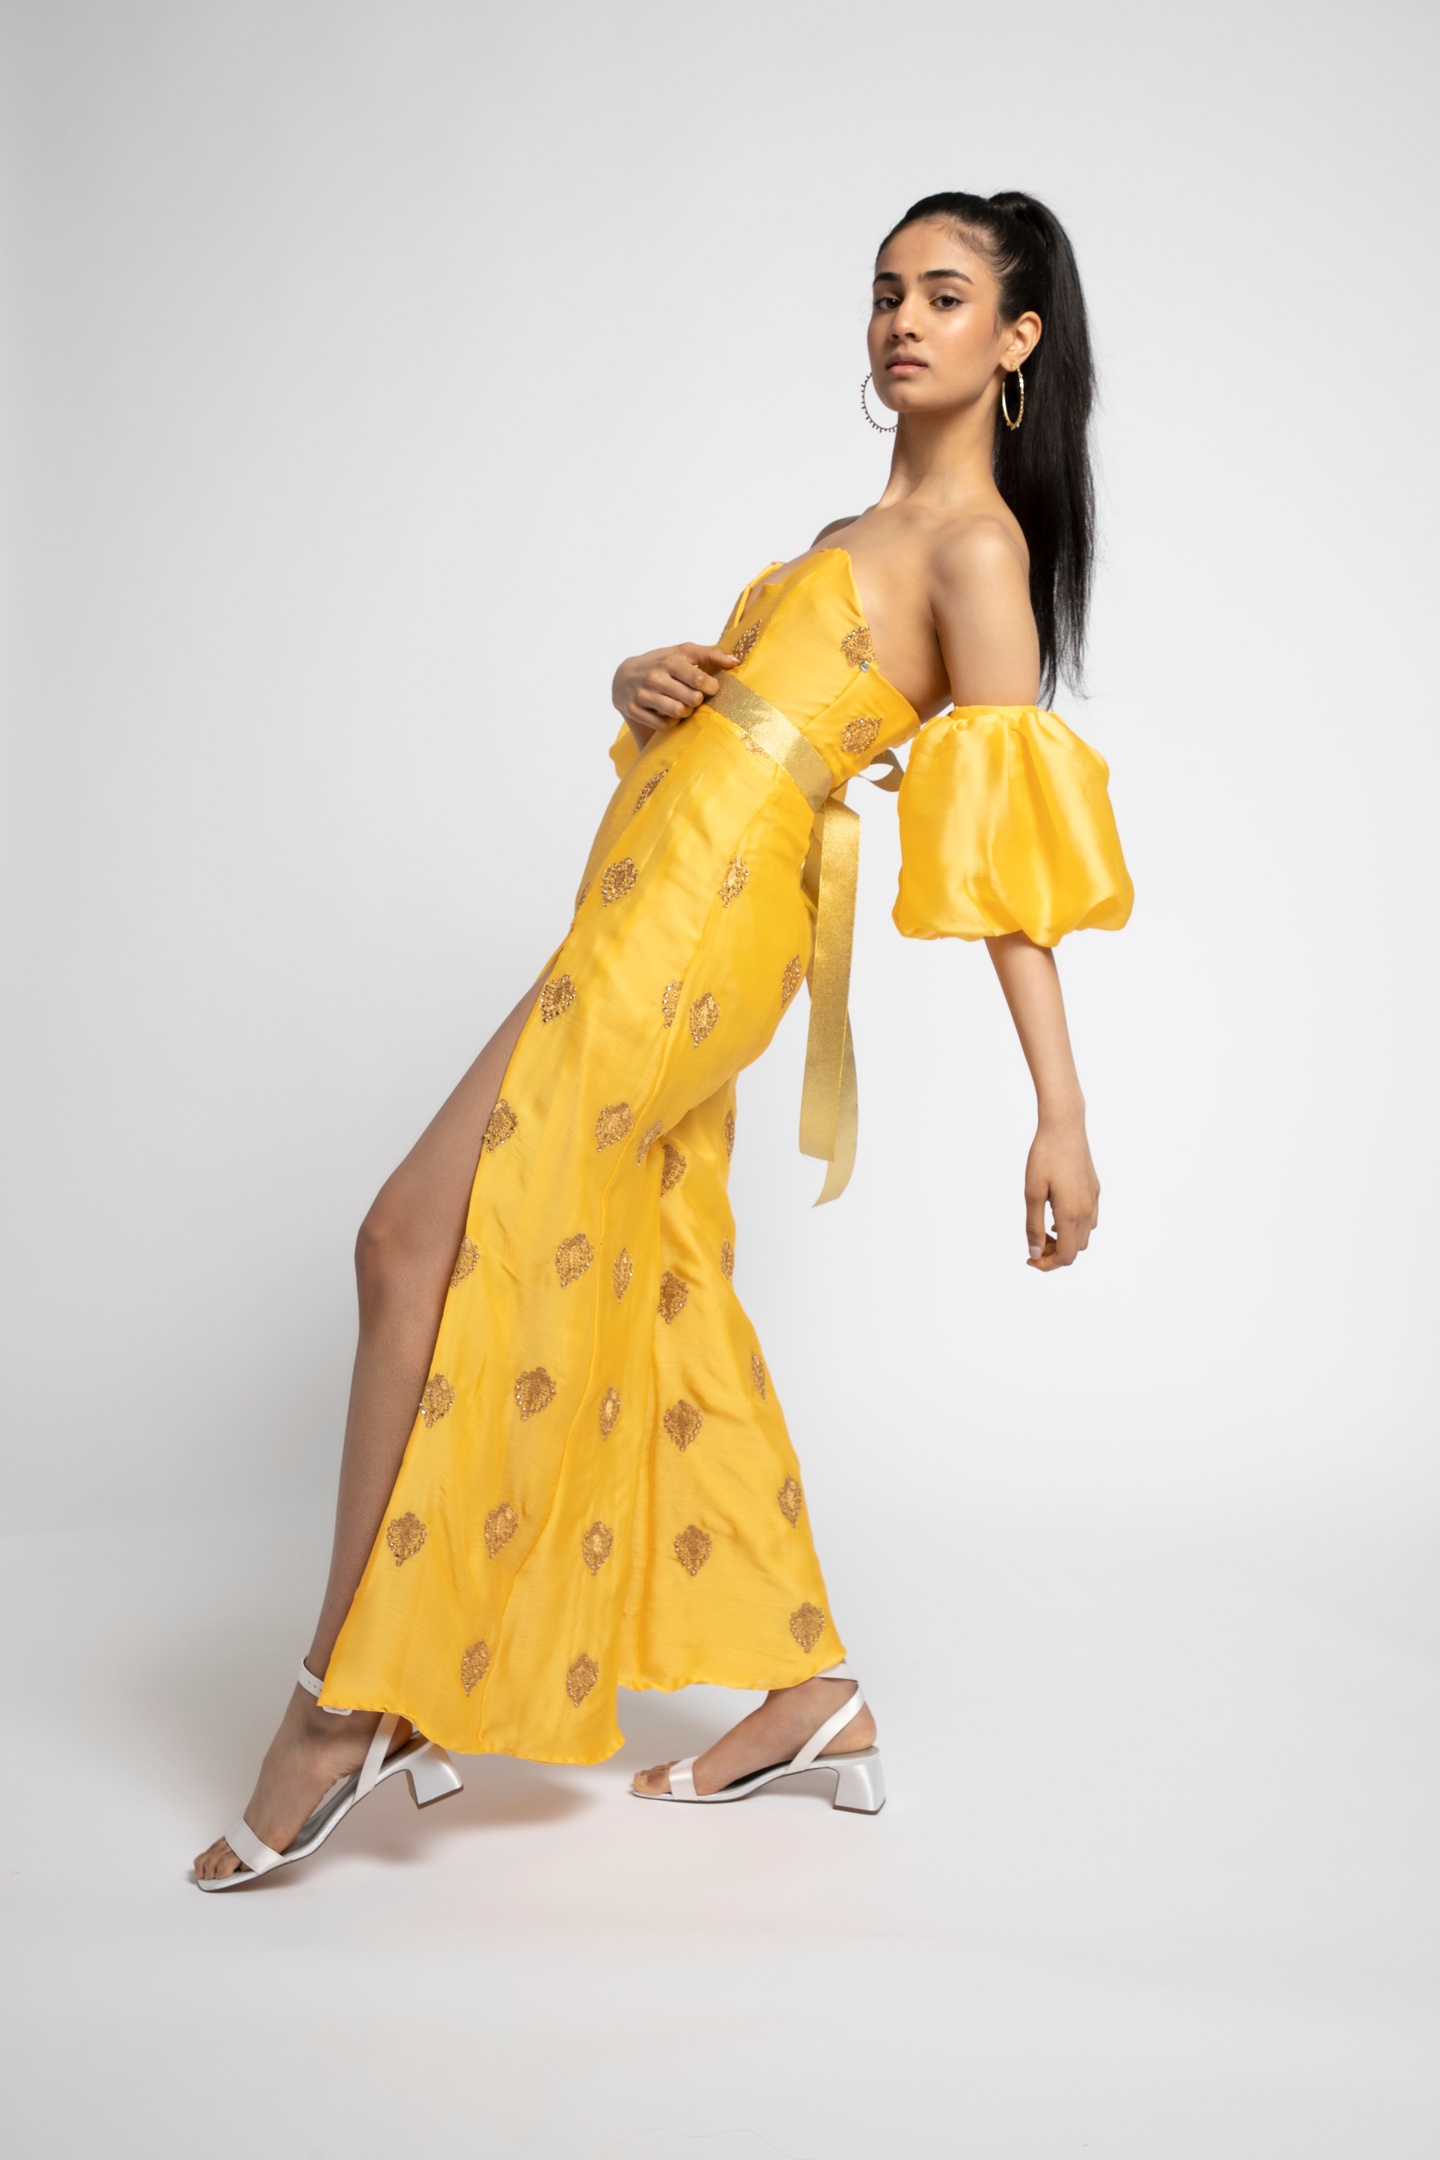 Model in a yellow strapless jumpsuit made of bright yellow fabric with a pattern of golden diamond-shaped motifs and cinched by a gold ribbon waistband. The jumpsuit legs are slit to the upper thigh on the front creating a skirtlike sweep. The model wears two detached sleeve puffs on her upper arms.